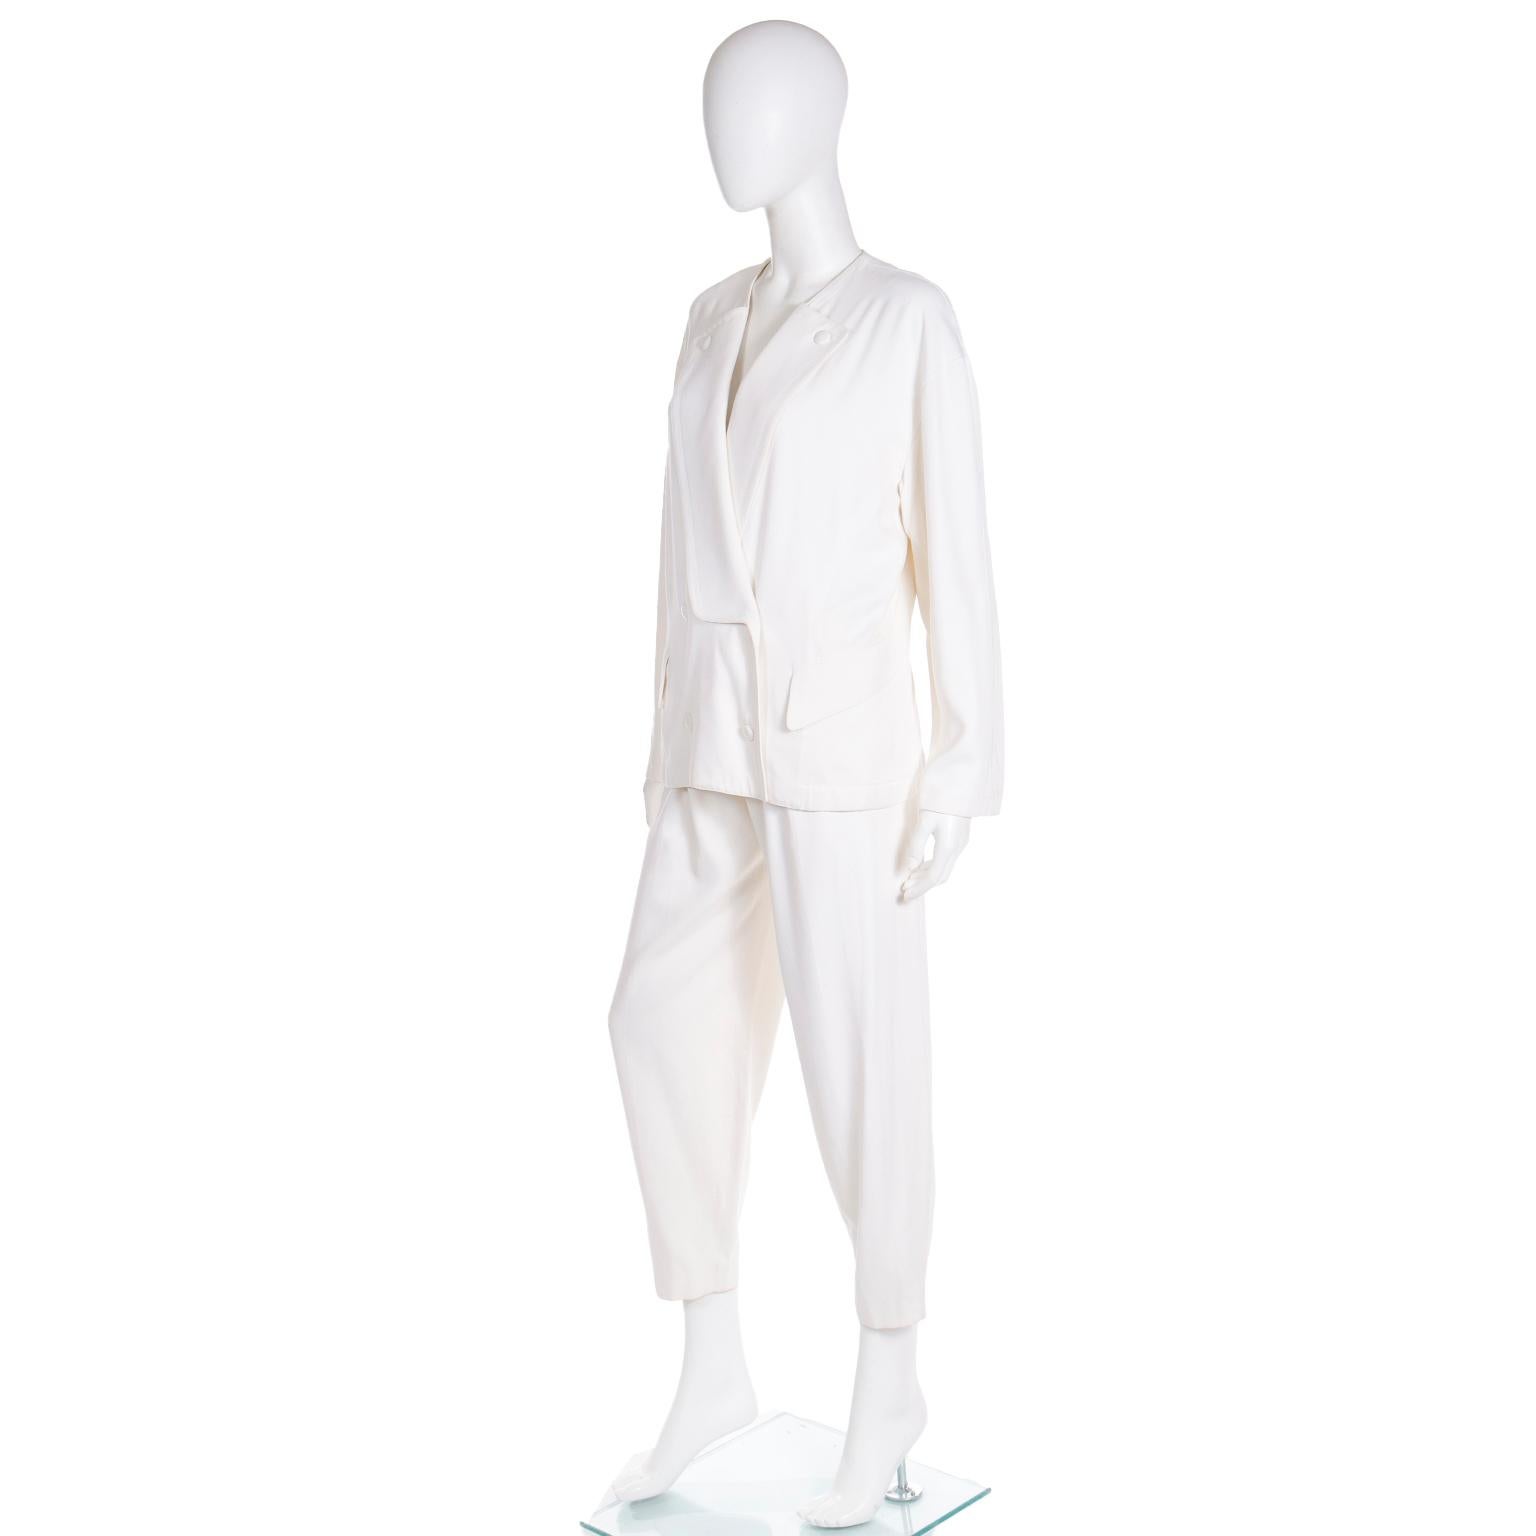 Thierry Mugler Vintage White 2 Pc Suit Jacket & Trousers Outfit  For Sale 3